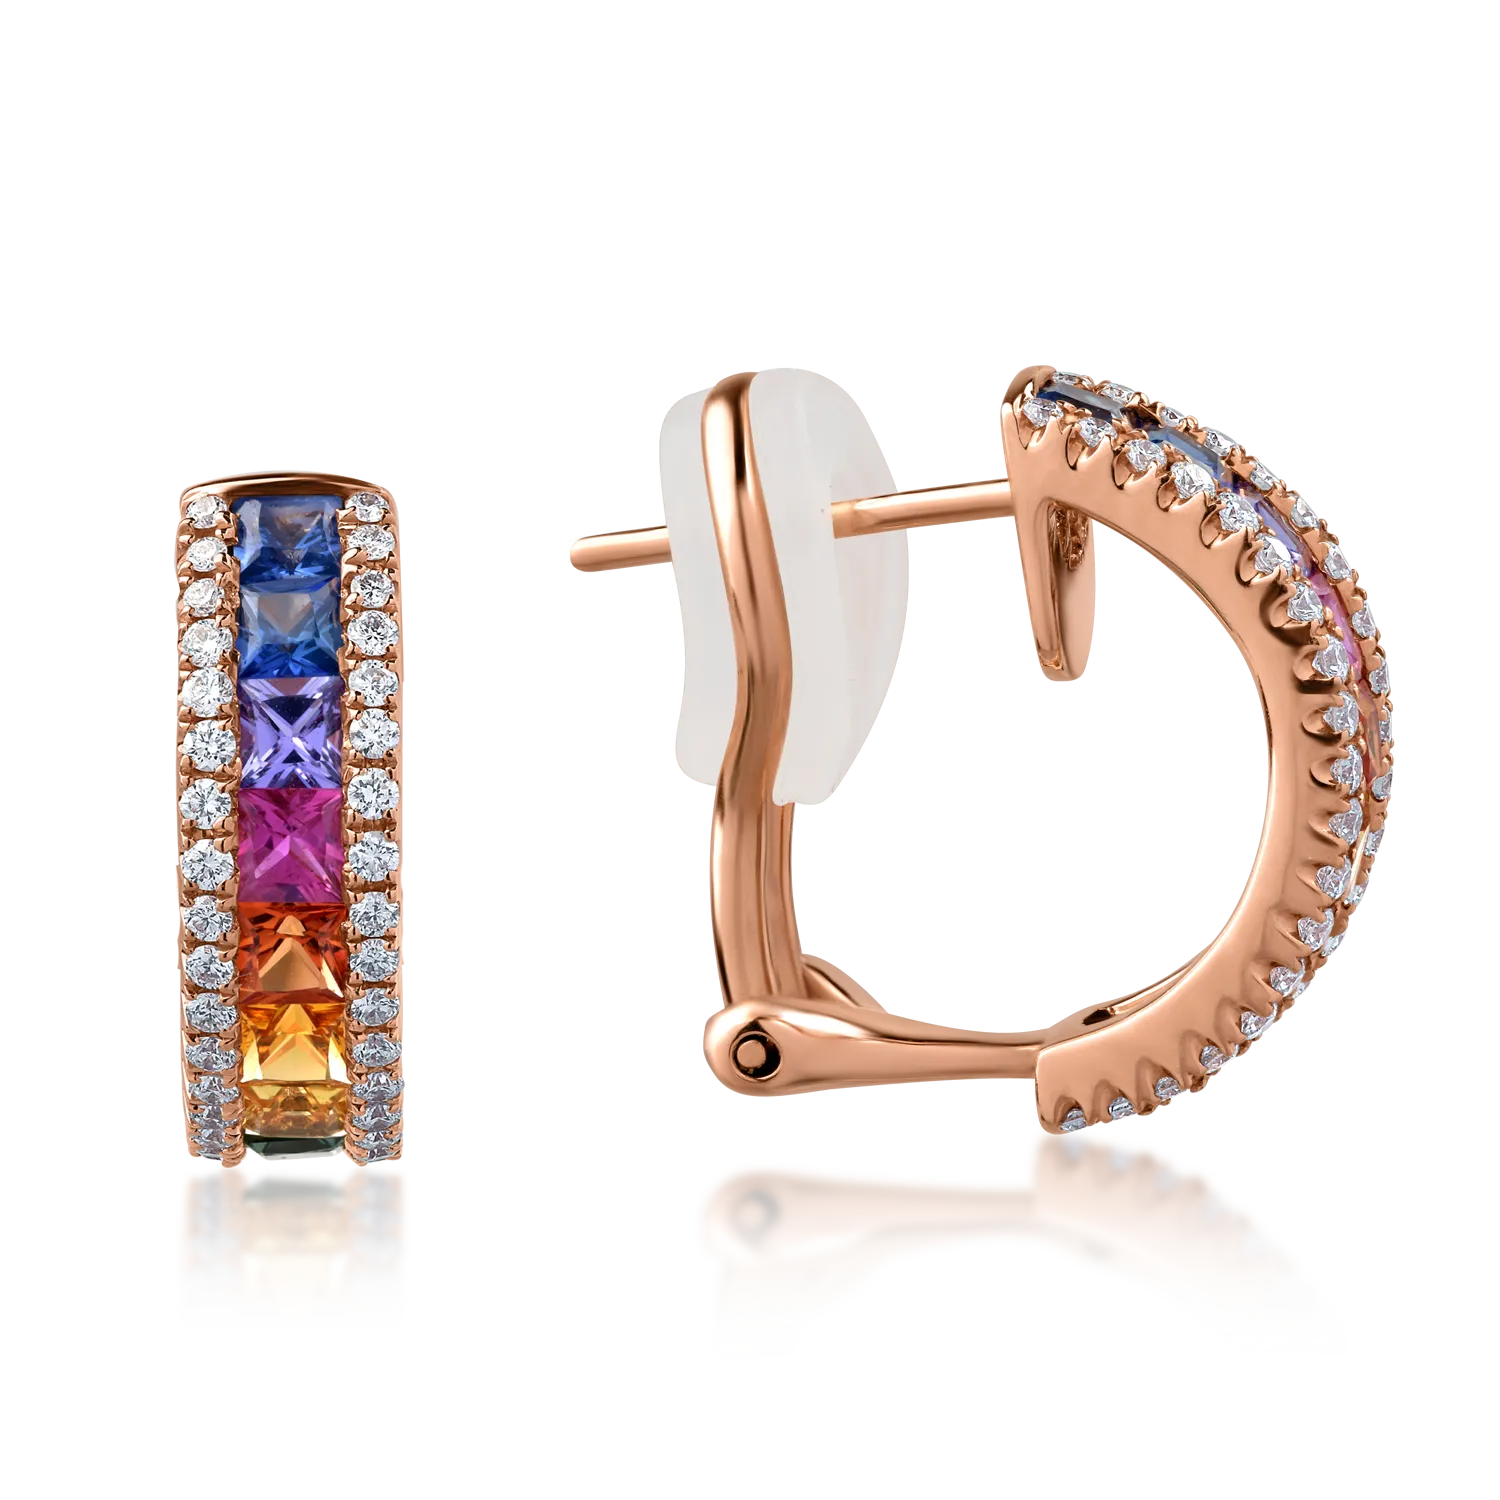 18K rose gold earrings with 1.72ct multicolored sapphires and 0.34ct diamonds